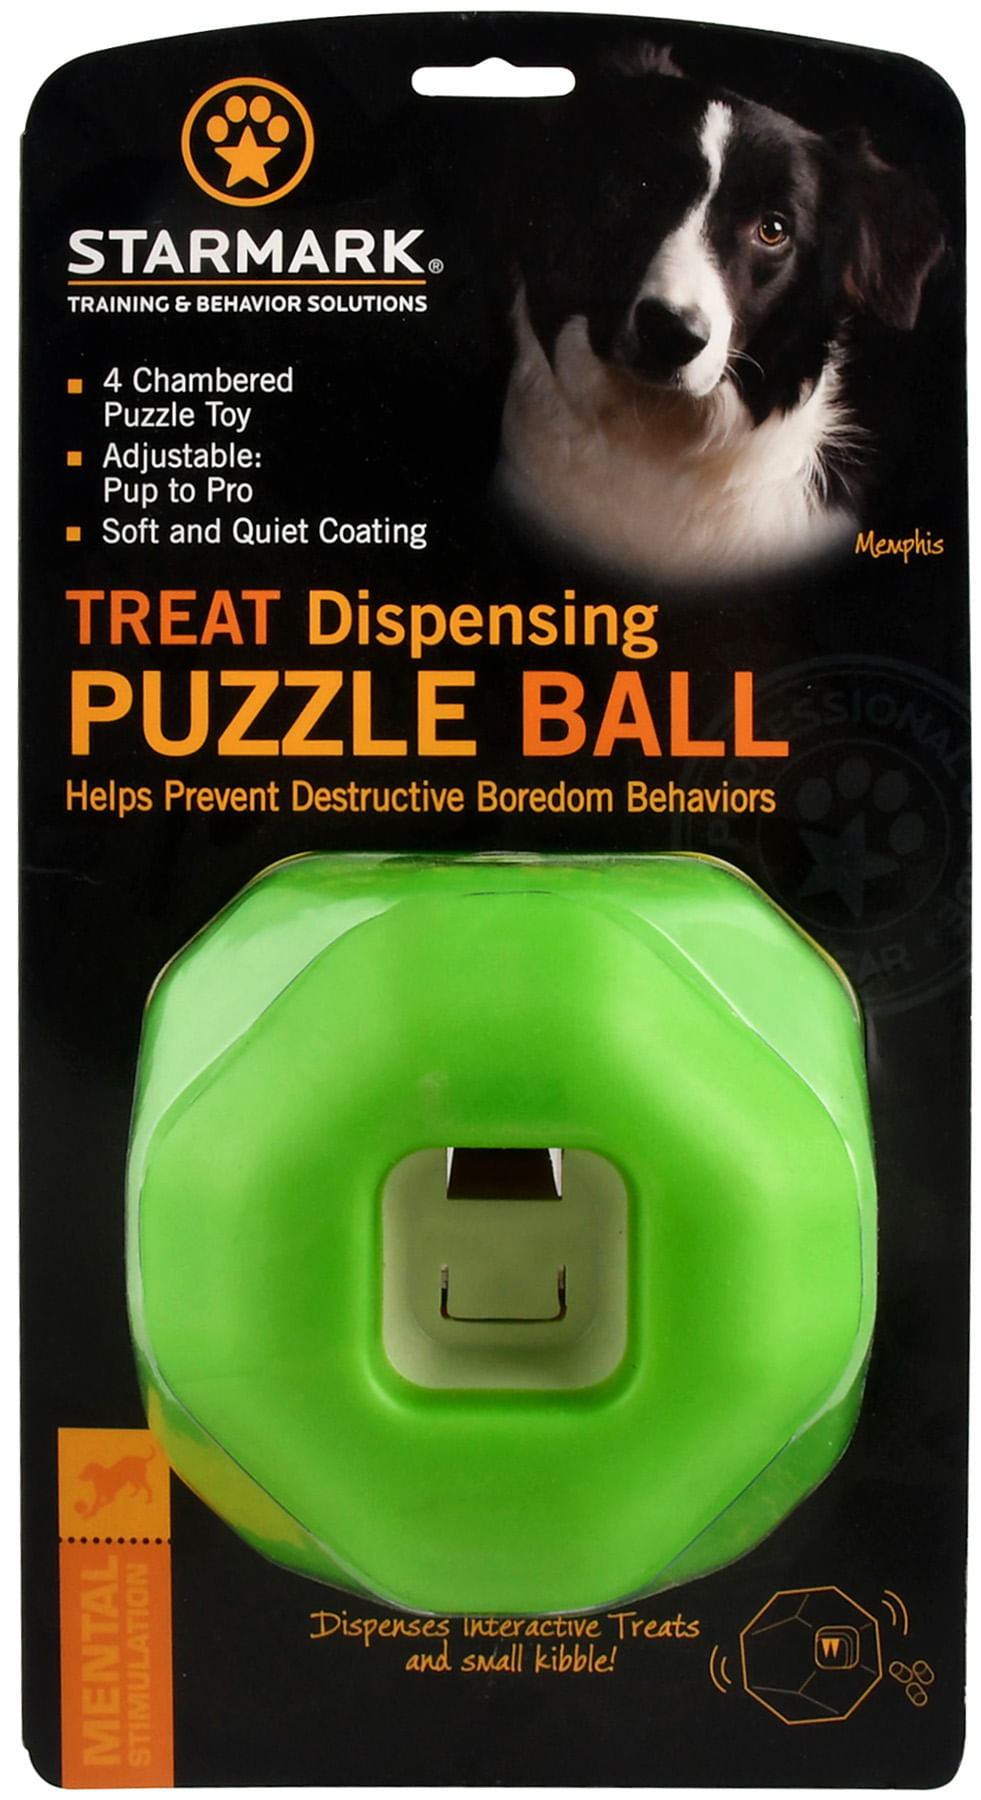 Treat Dispensing Puzzle Ball by Starmark